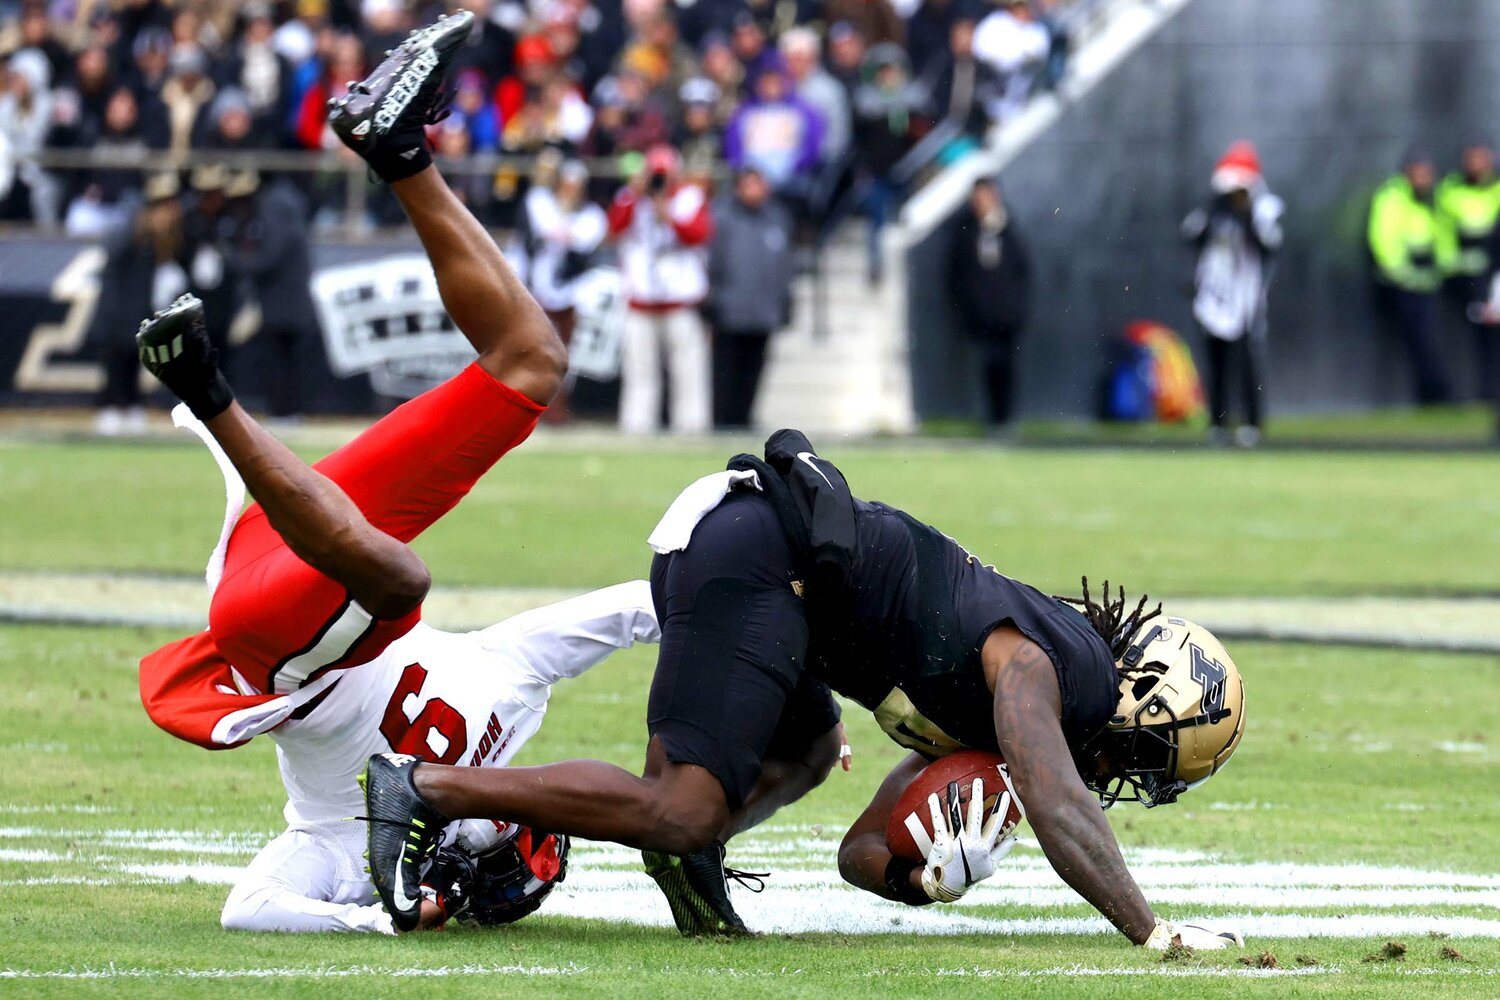 Deion Burks of Purdue - rolling catch of pass for 2-yard gain, tackle by Jamier Johnson of Indiana